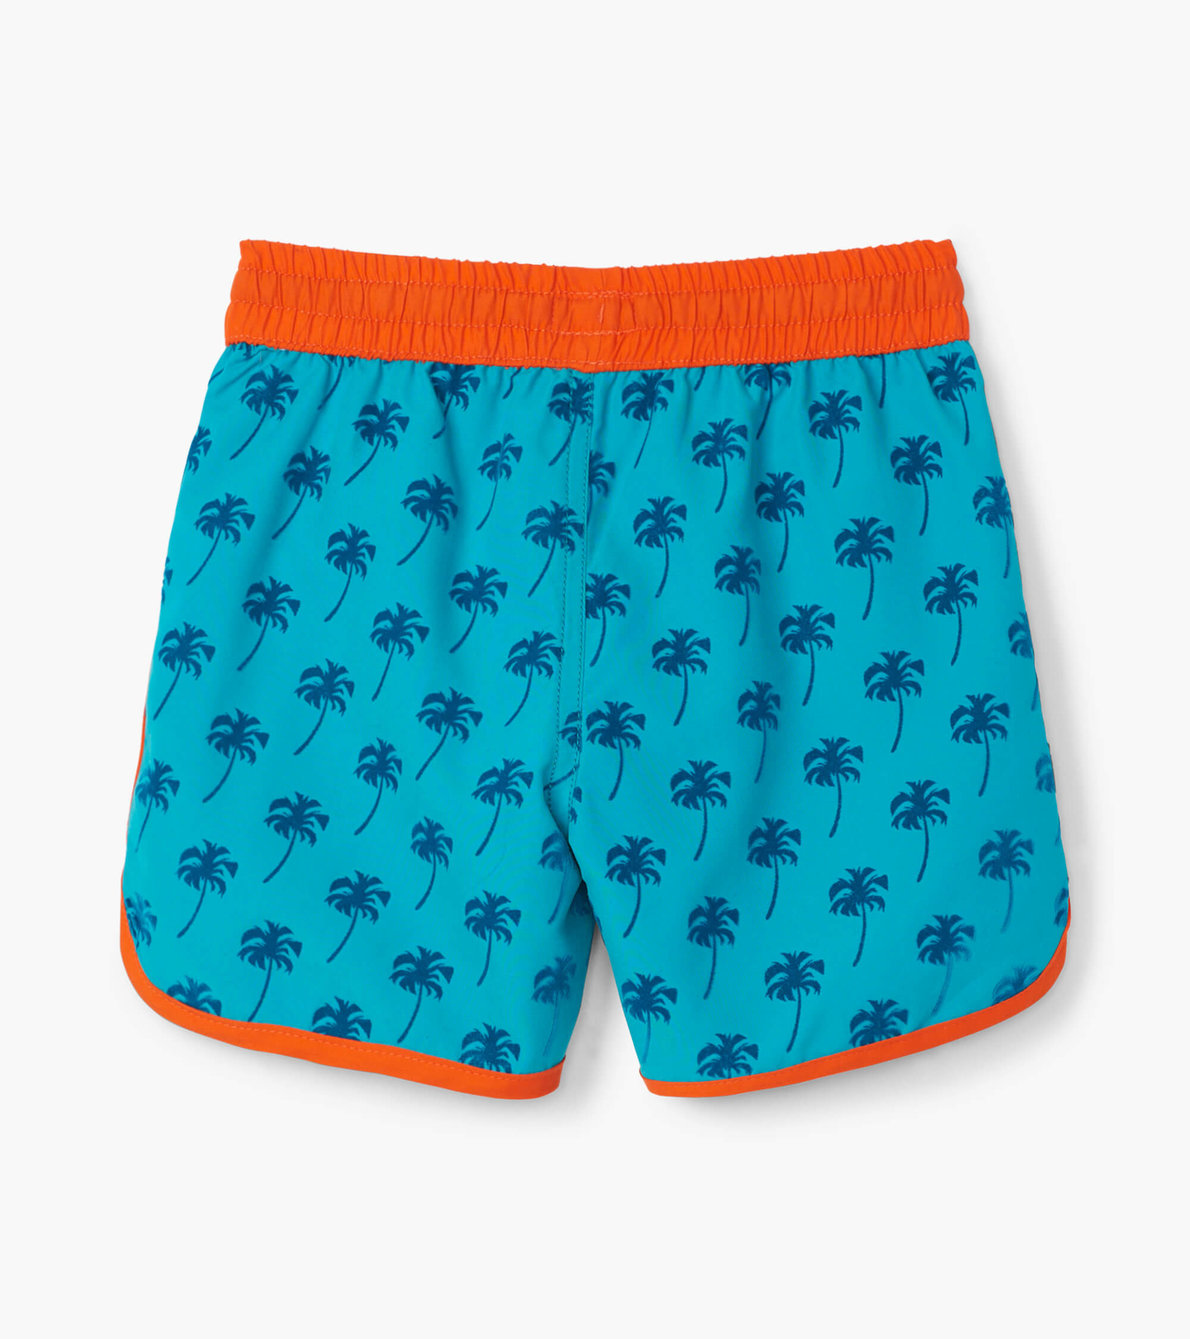 View larger image of Tropical Palms Swim Shorts